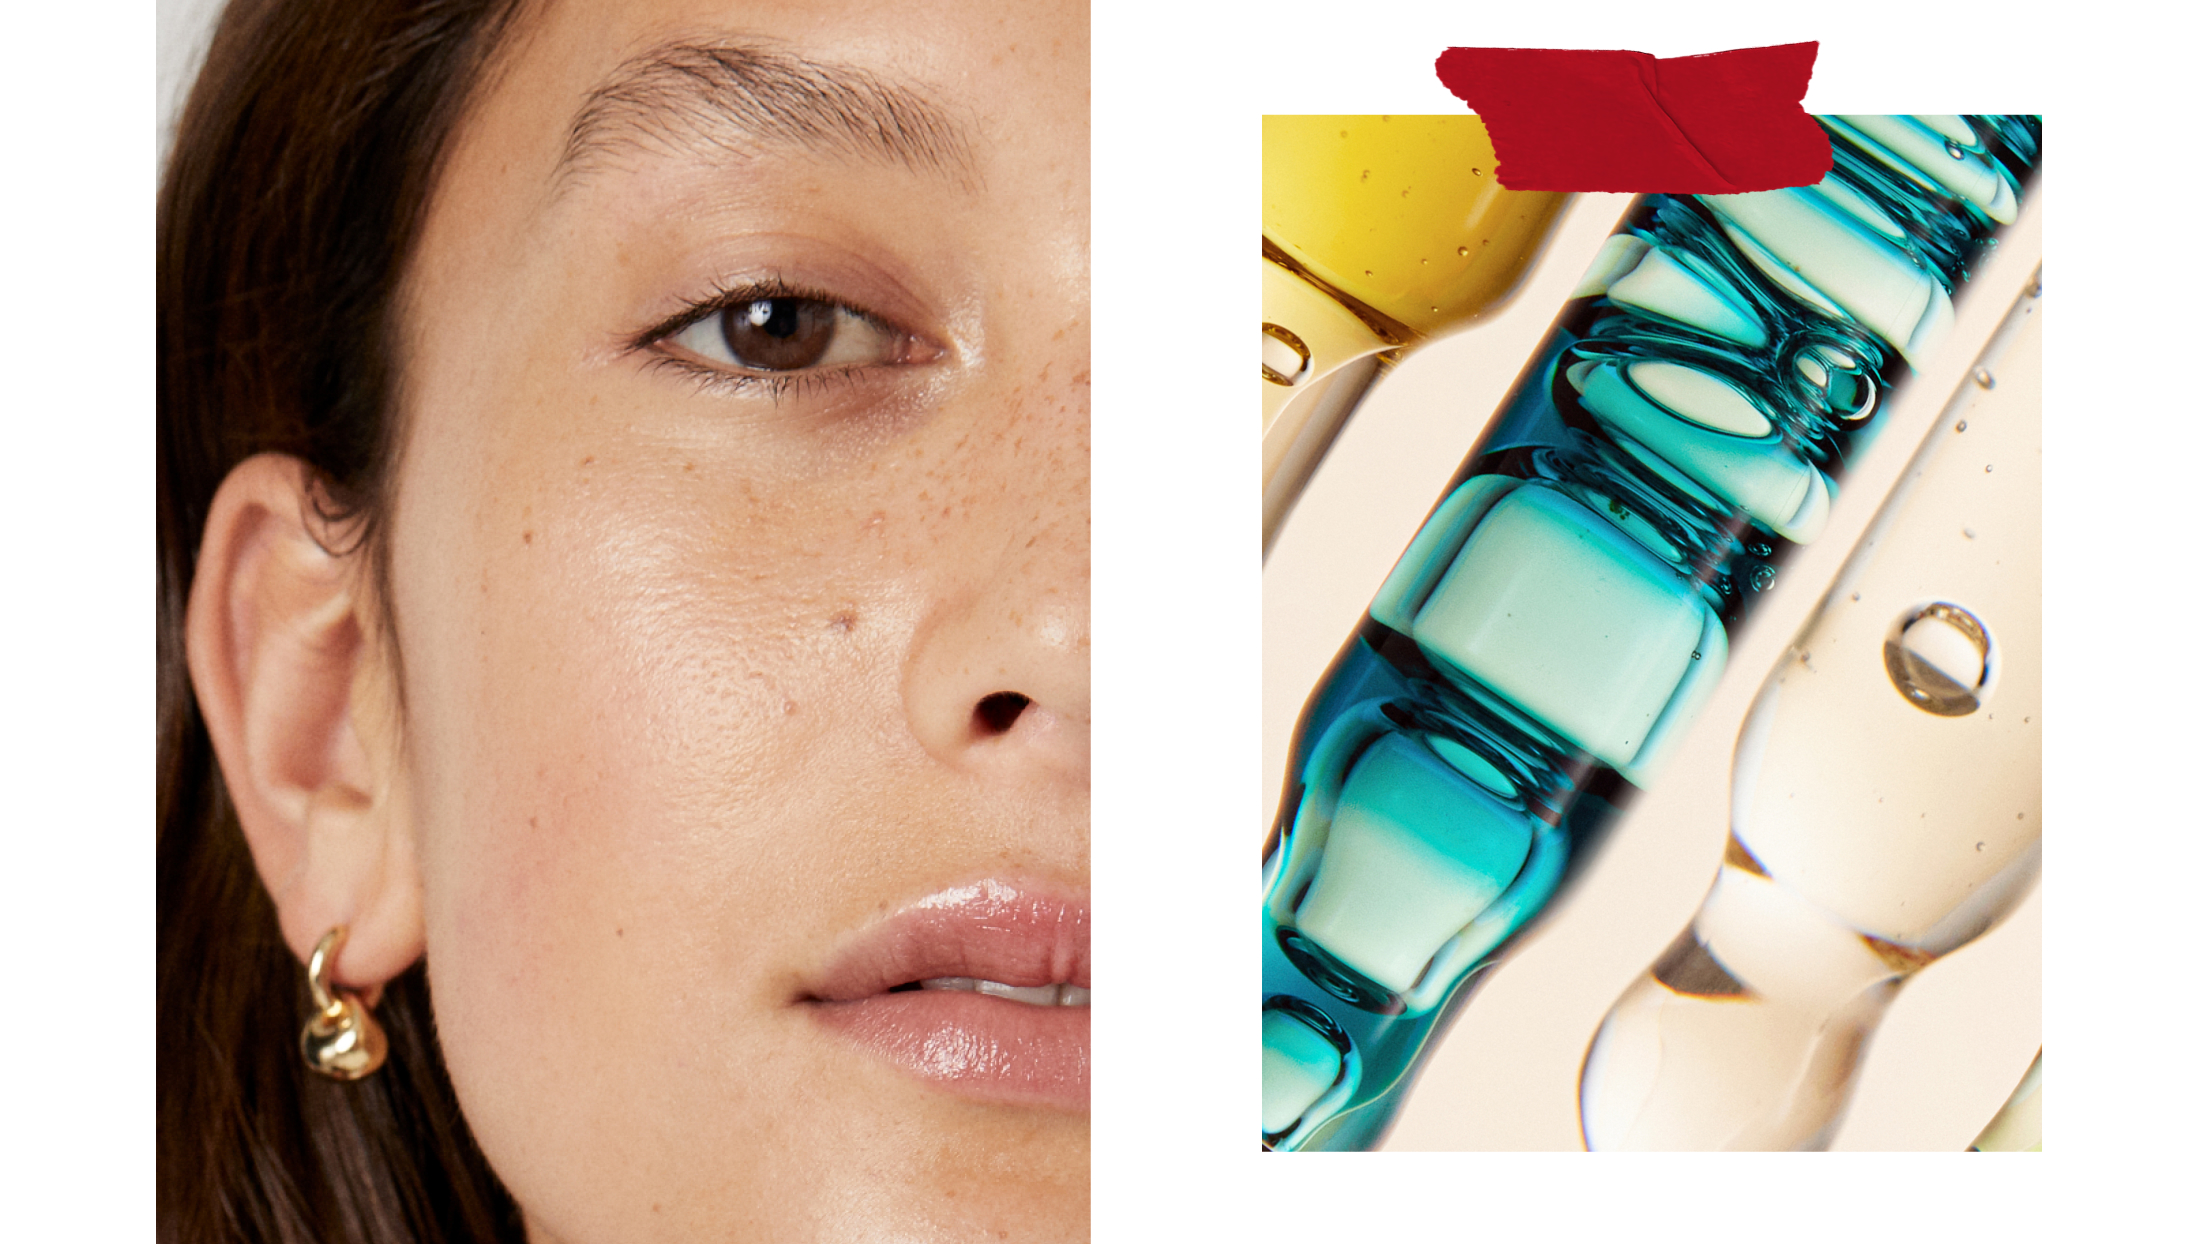 How Does Retinol Work? Benefits and Rules of Use Explained